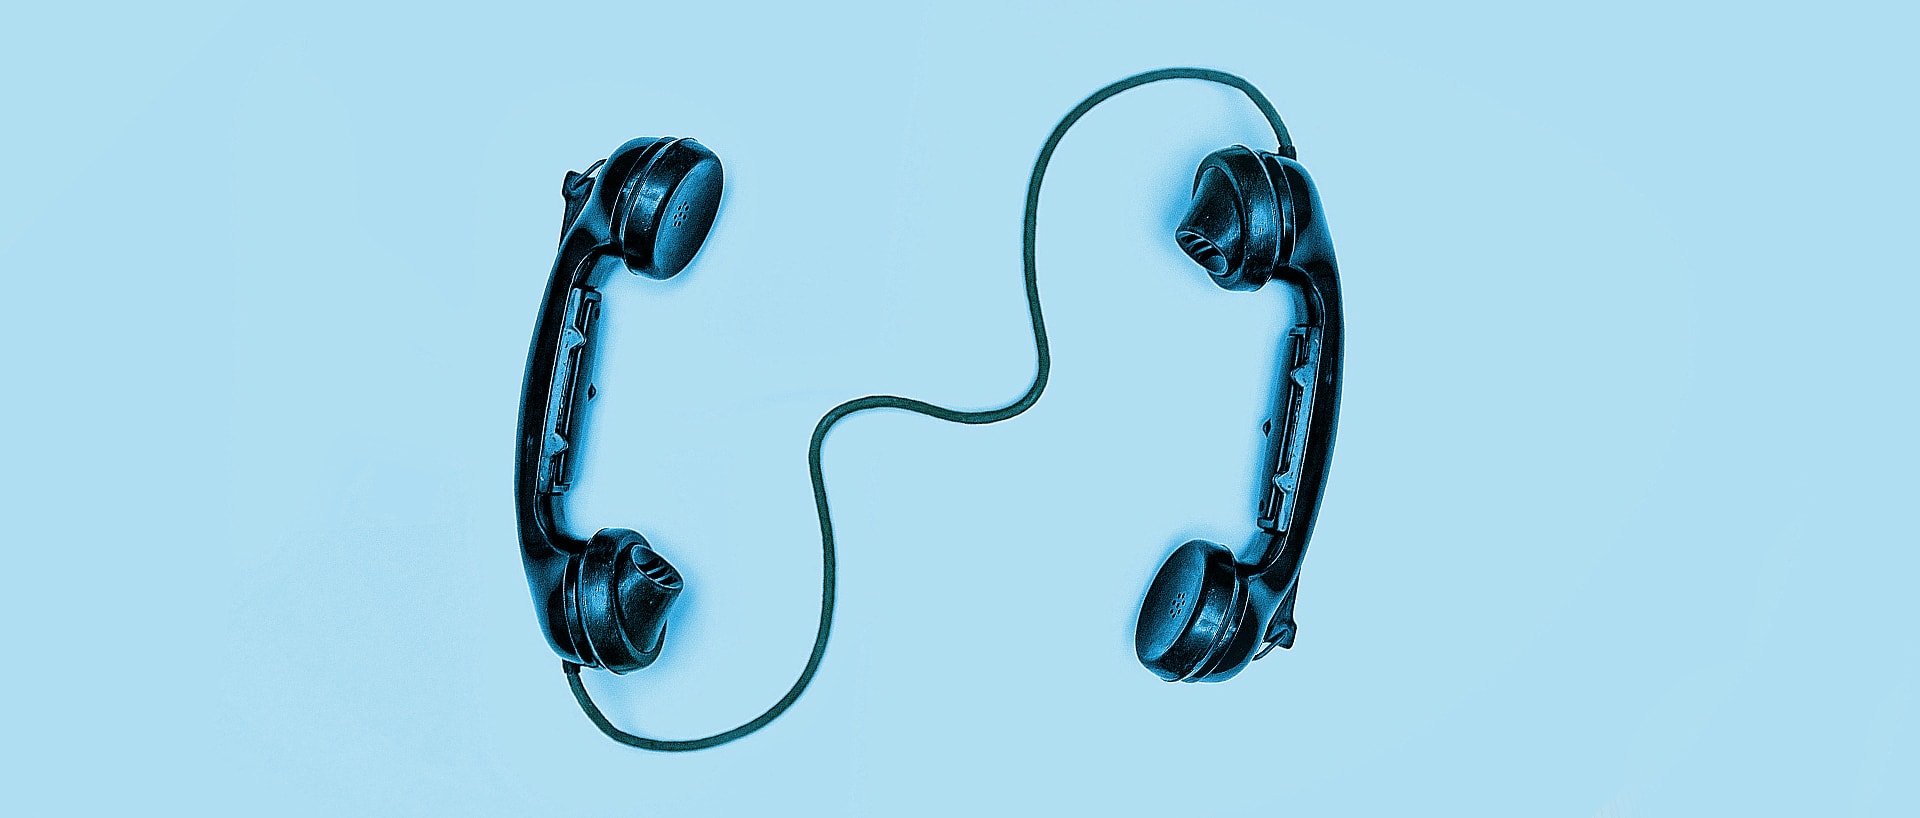 Two old-fashioned phone headsets are attached to each other with a cord.